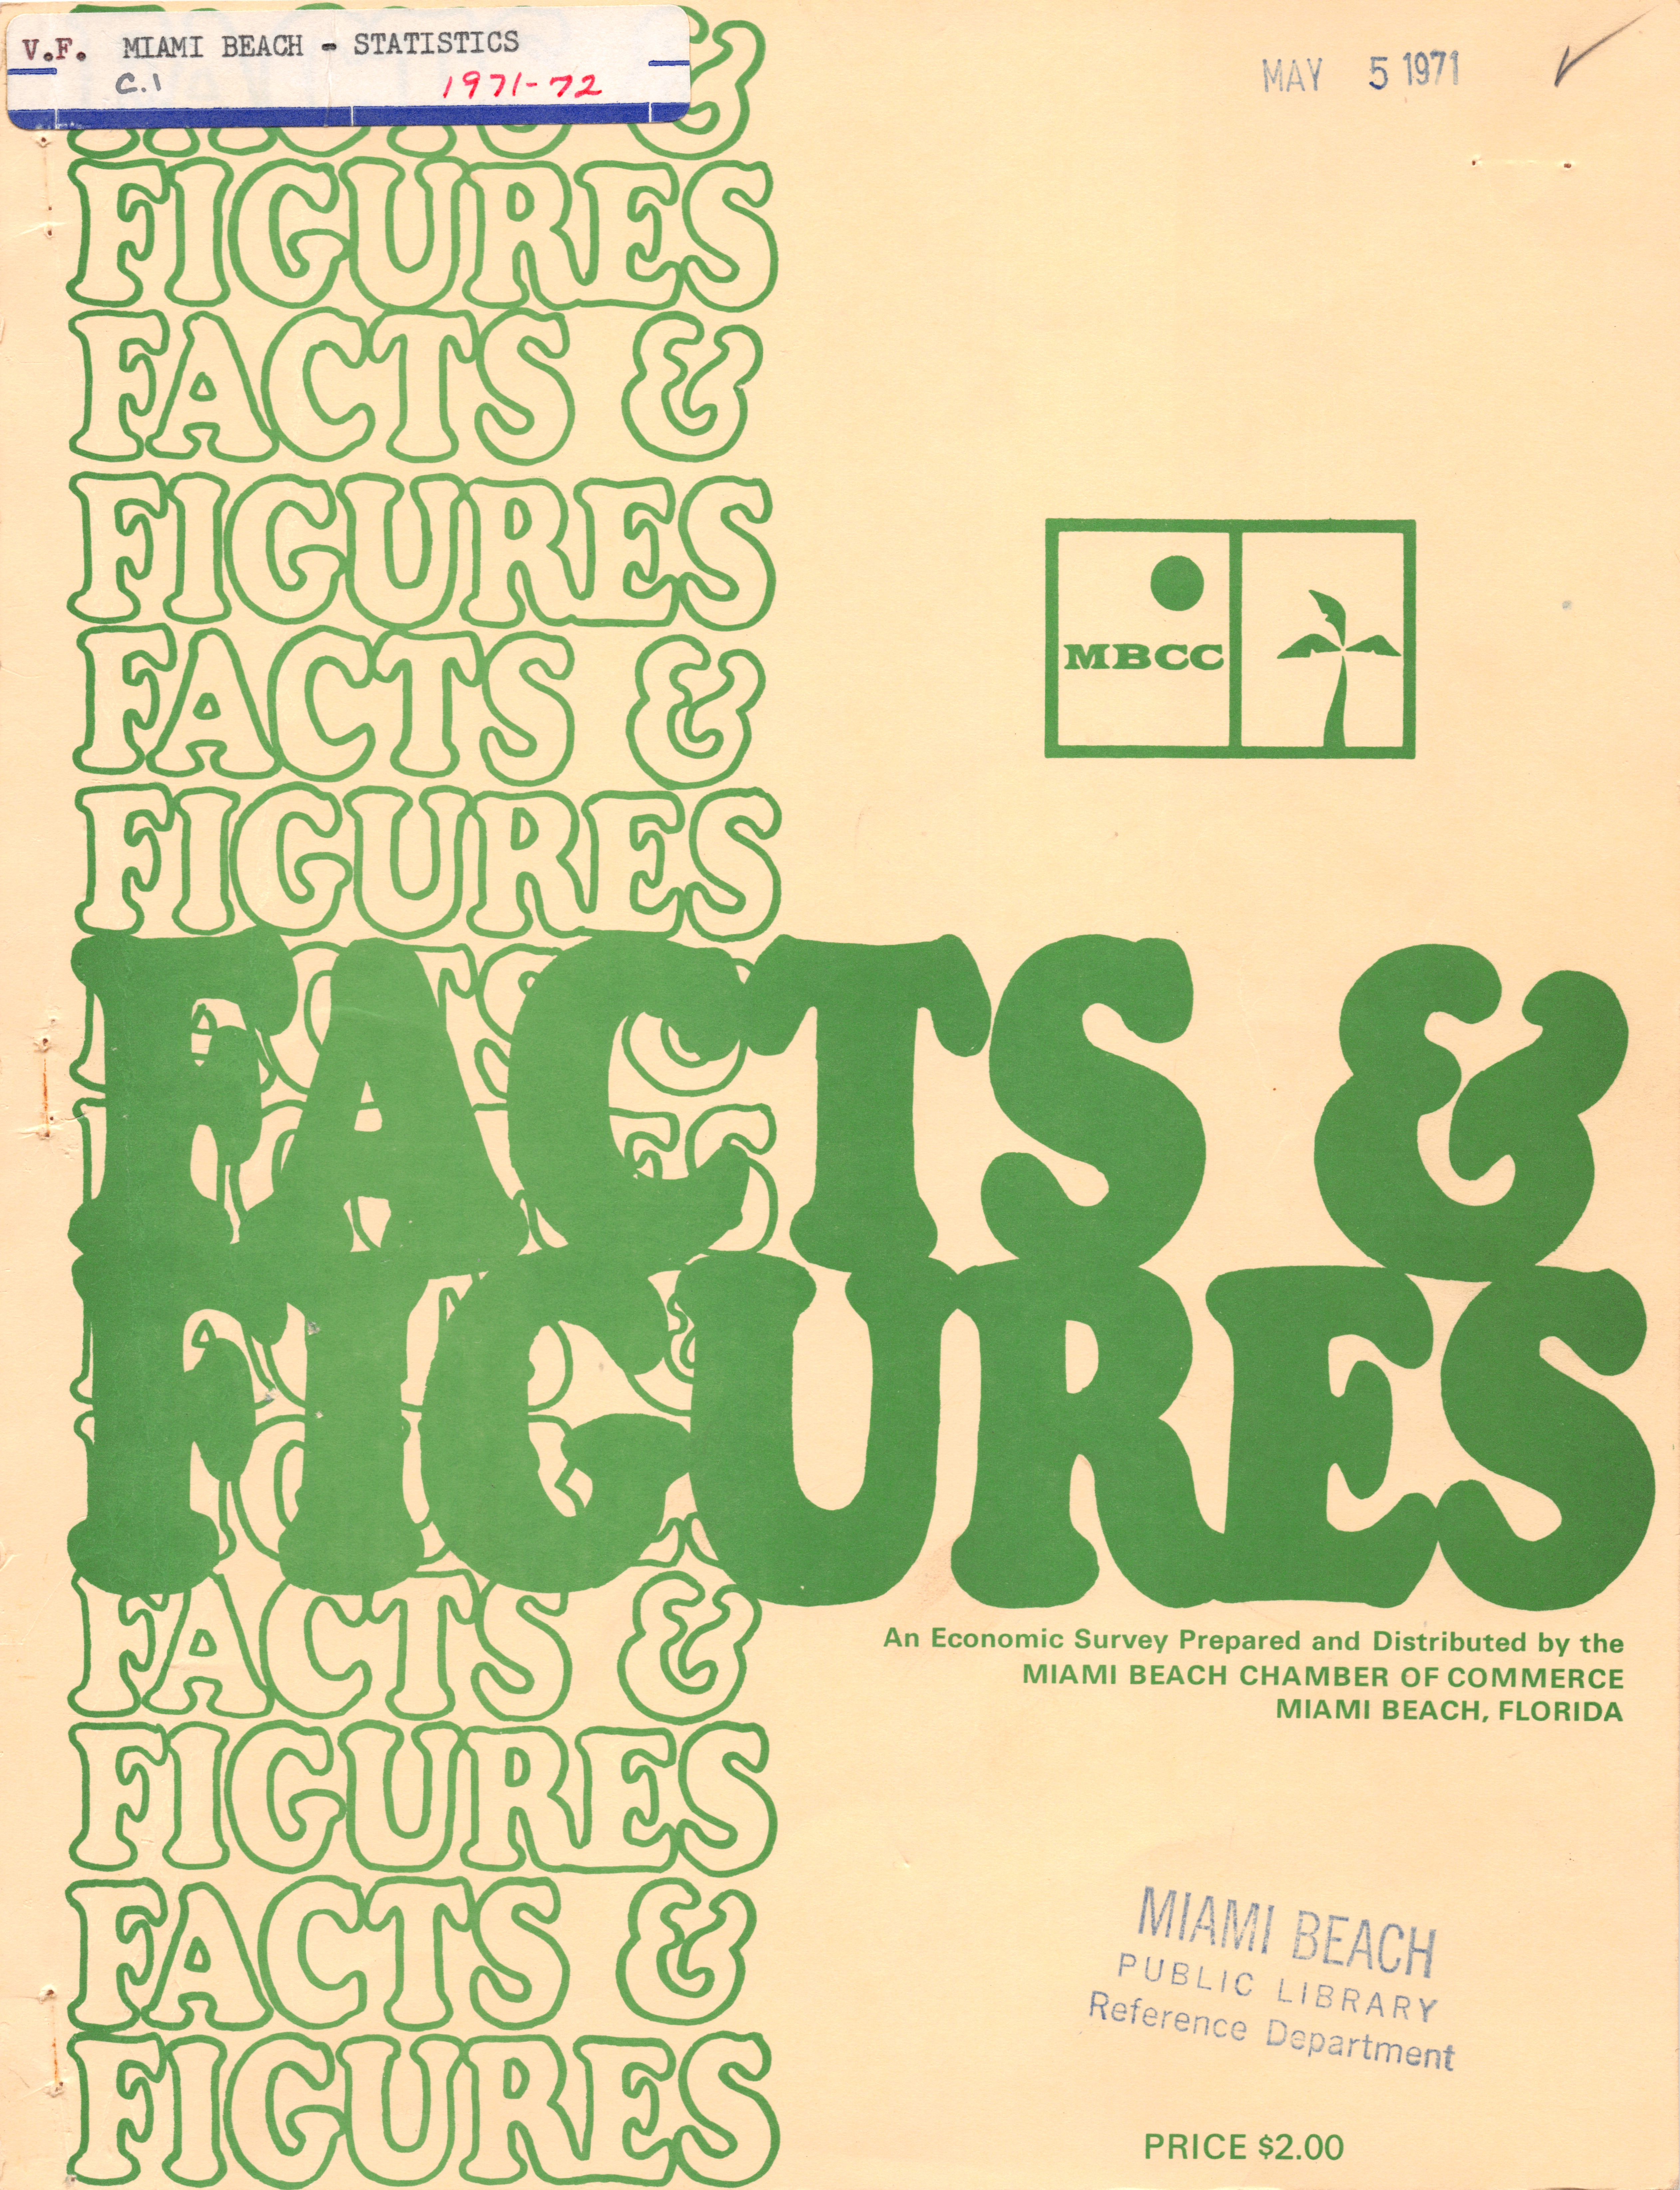 Facts & Figures: An Economic Survey 1972 - Typescript, cover: Facts & Figures: An Economic Survey Prepared and Distributed by the Miami Beach Chamber of Commerce Miami Beach, Florida